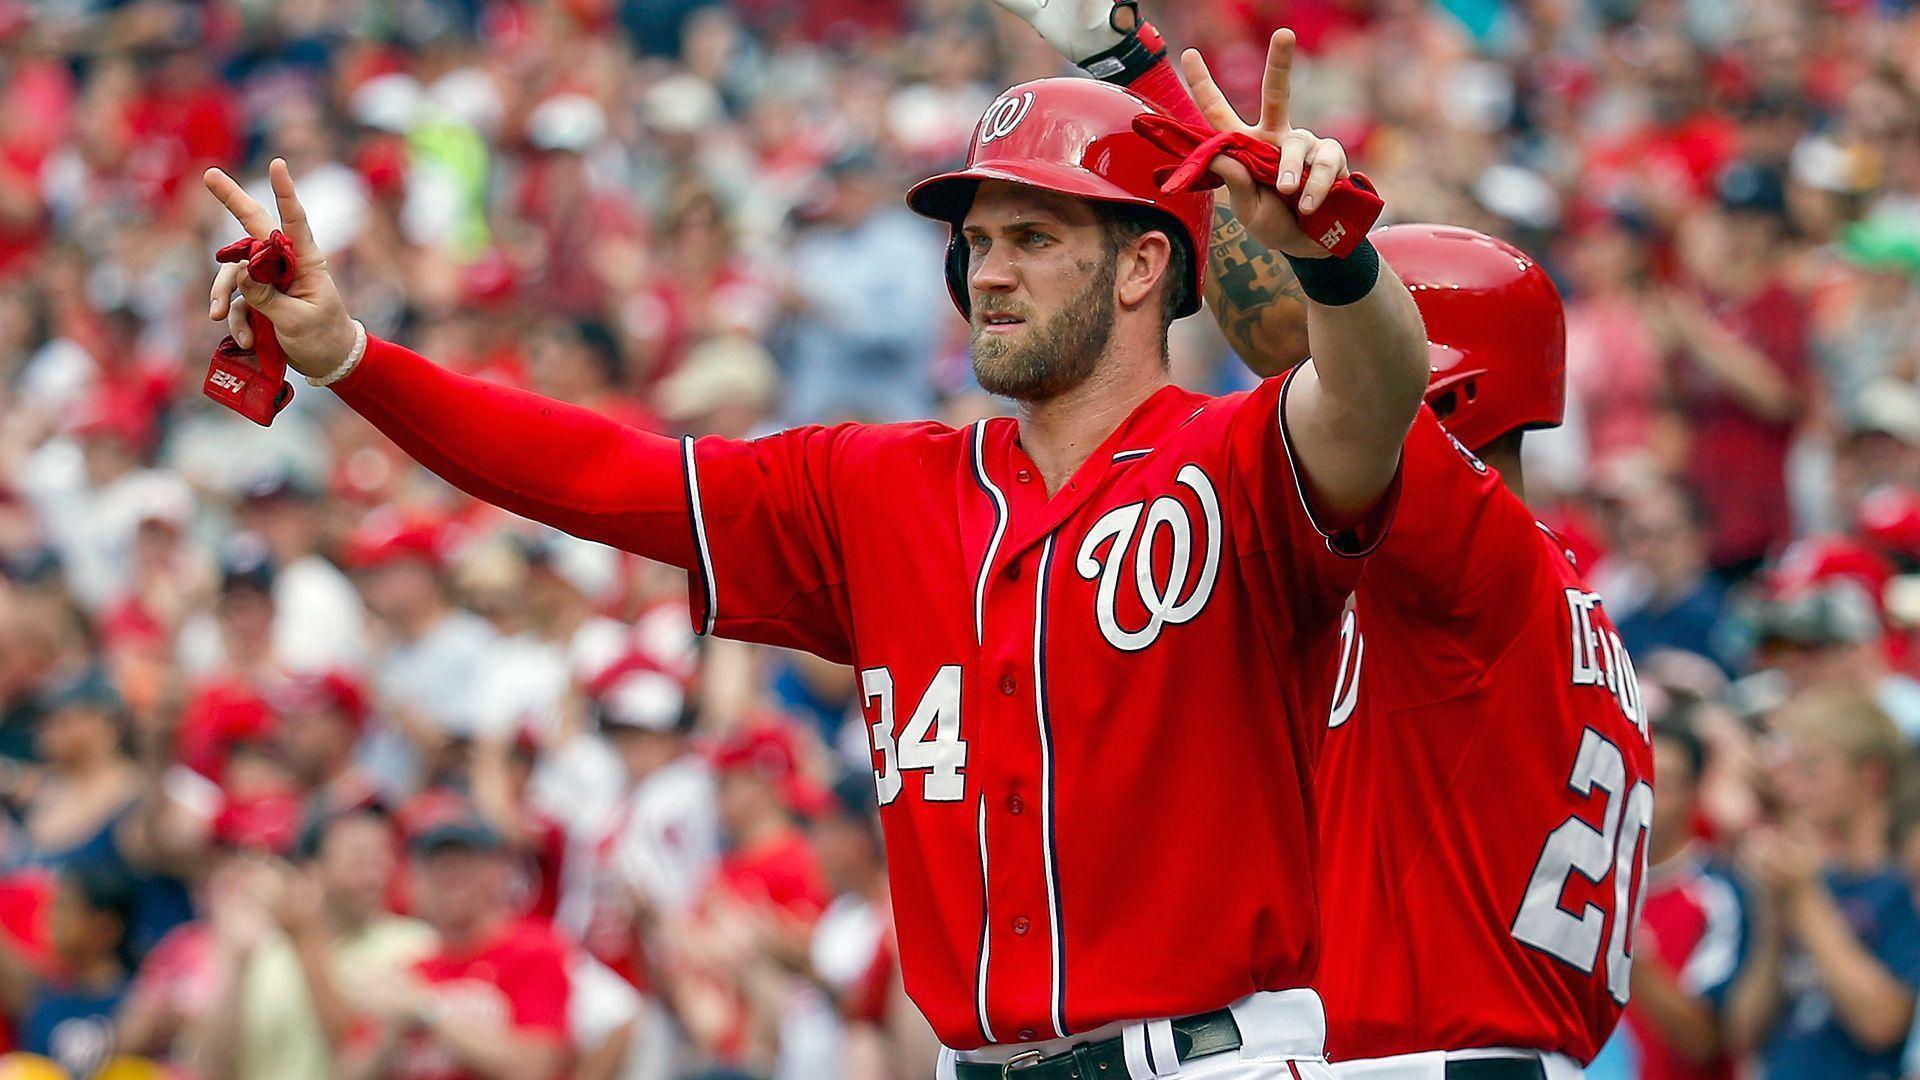 Bryce Harper says to hell with MLB's dumb unwritten rules. MLB